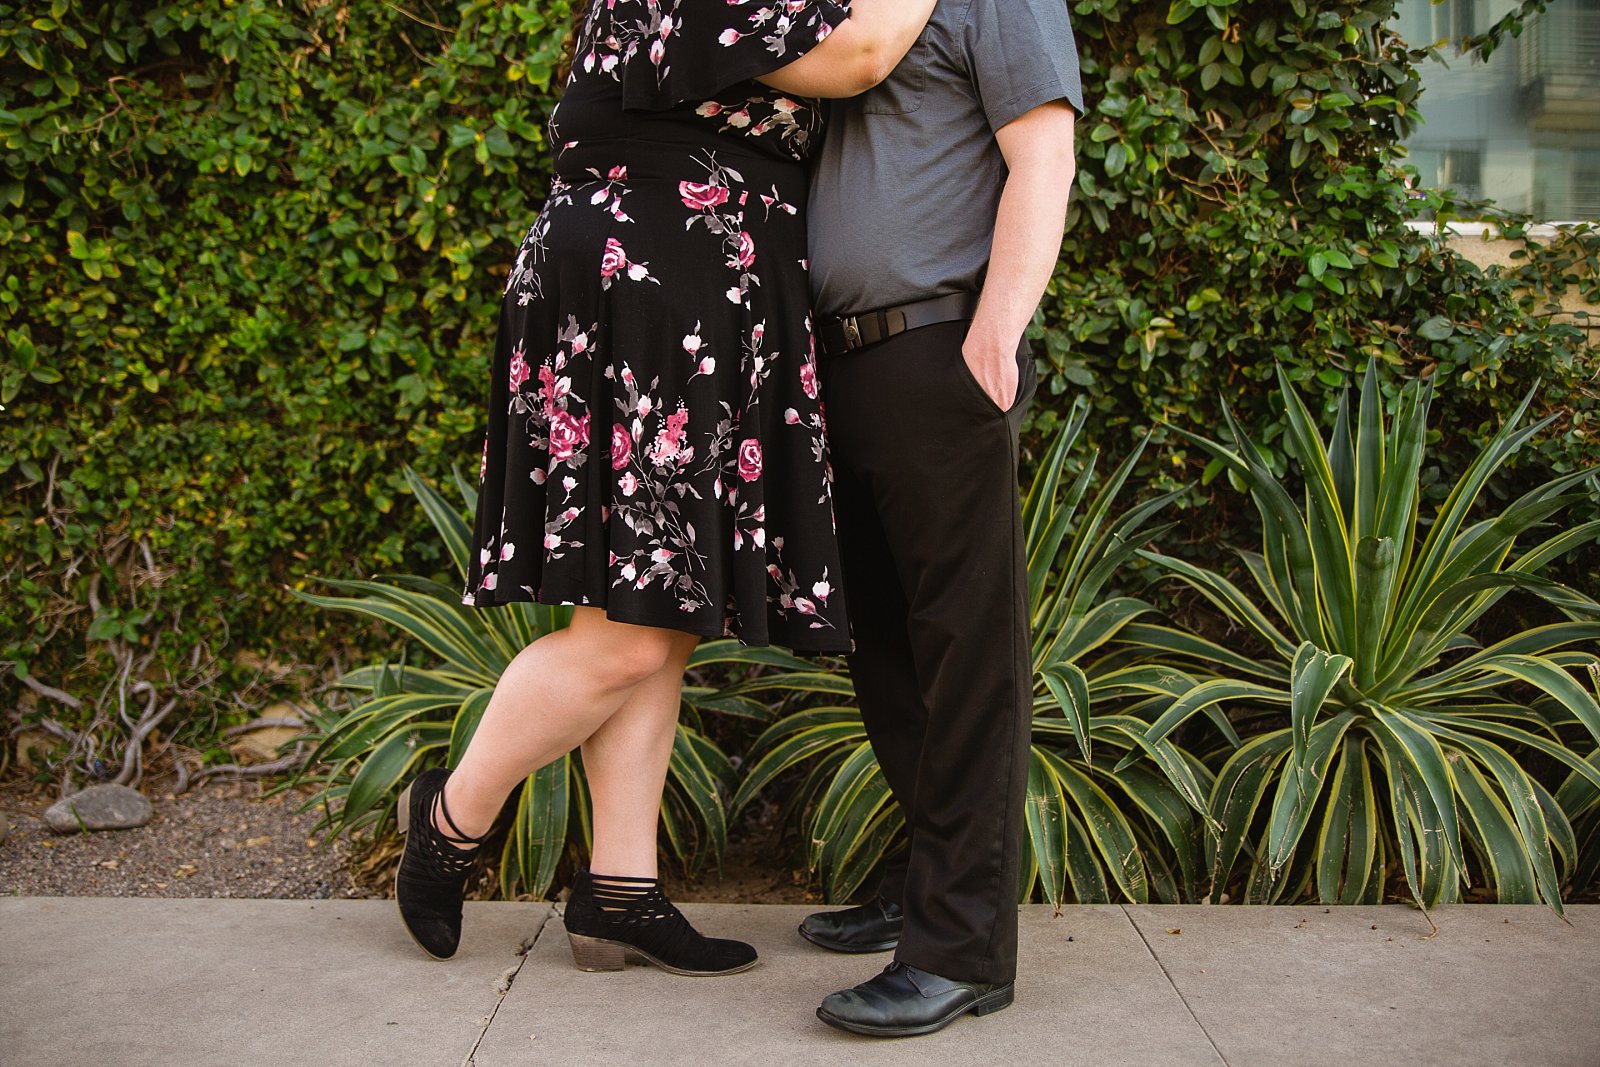 Couple's engagement session outfits in front of living plant wall during their downtown Phoenix engagement session by PMA Photography.